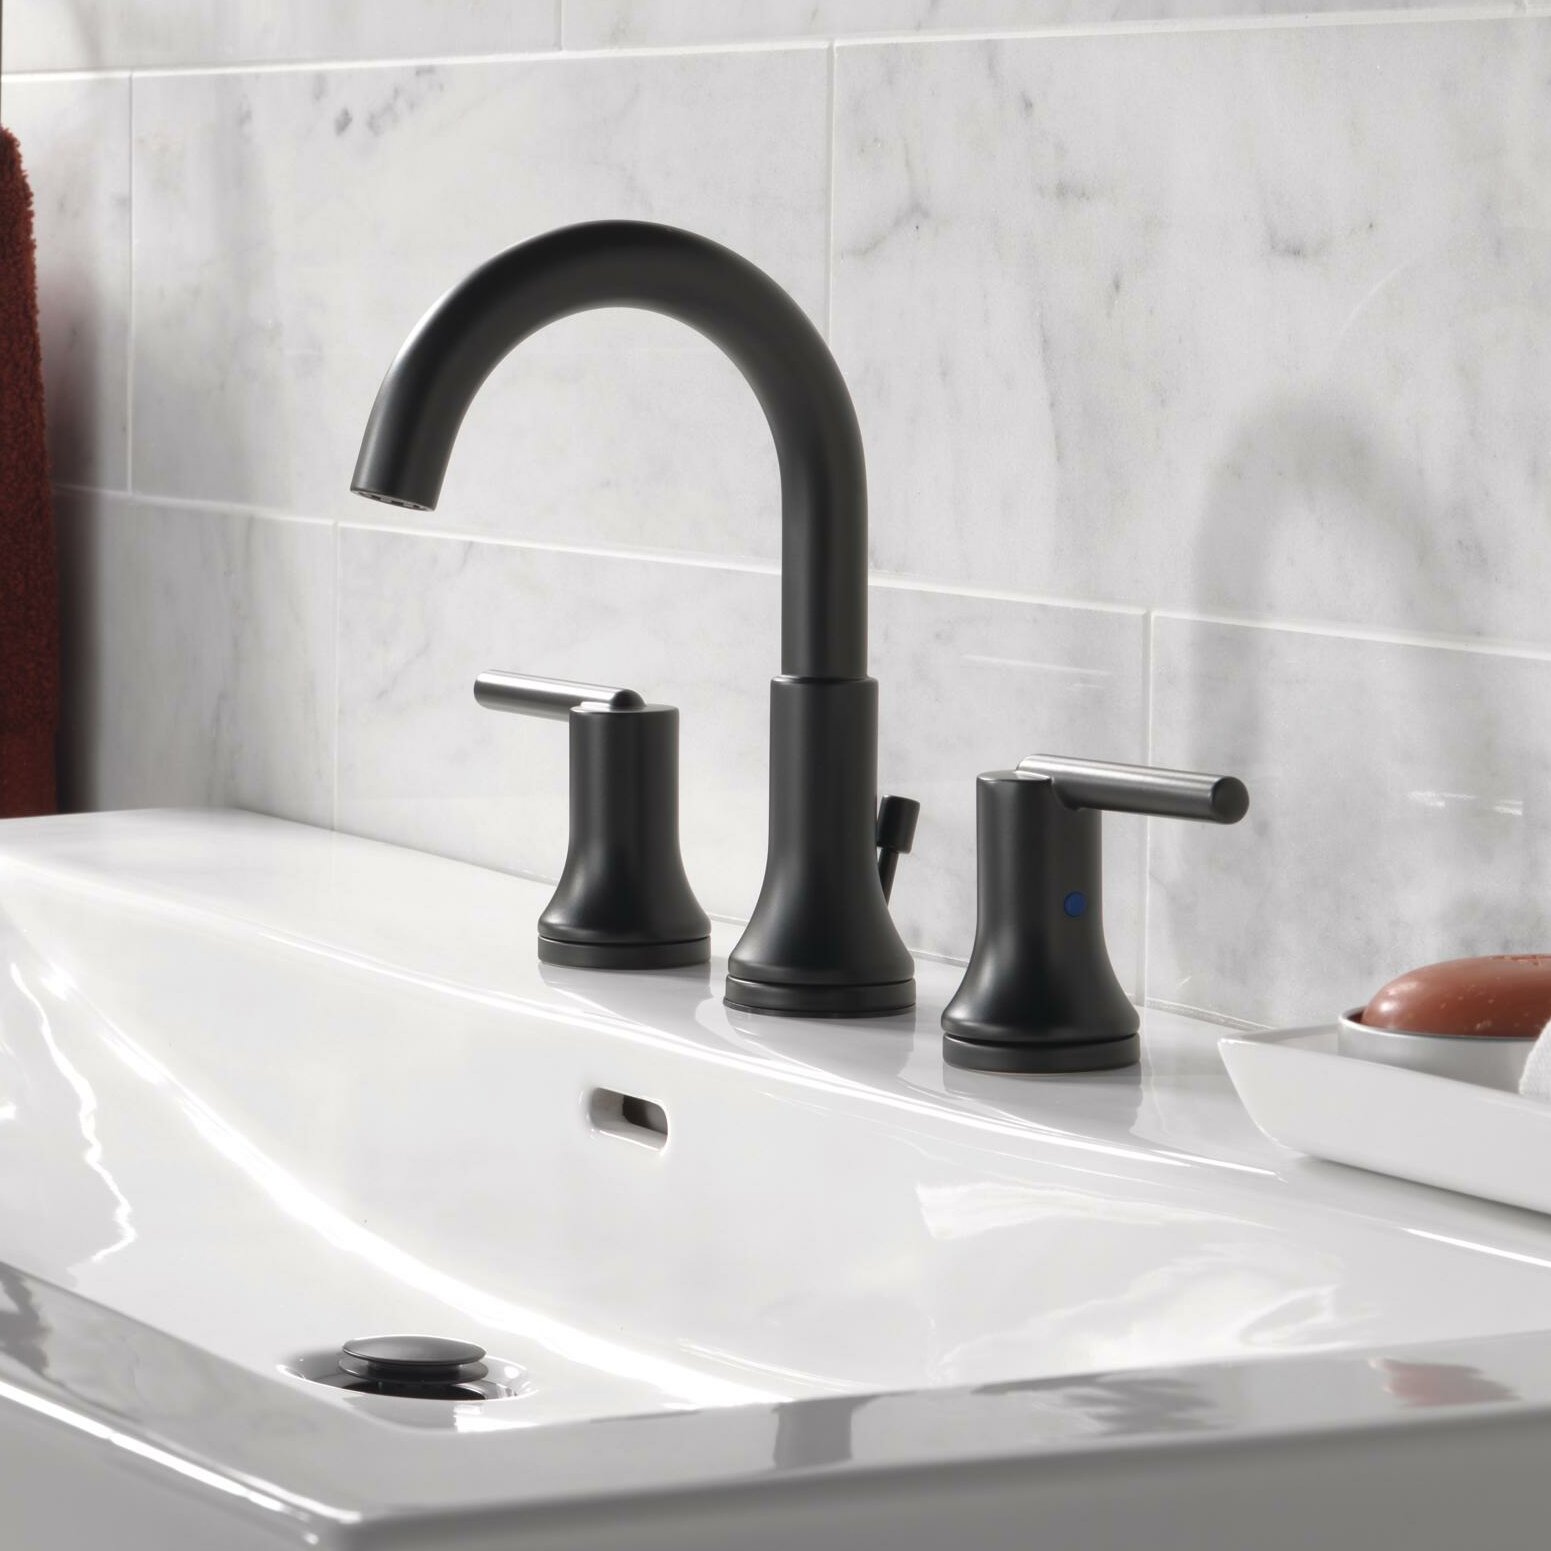 China Cheap Sanitary Ware Bathtub Faucets Factory And Suppliers